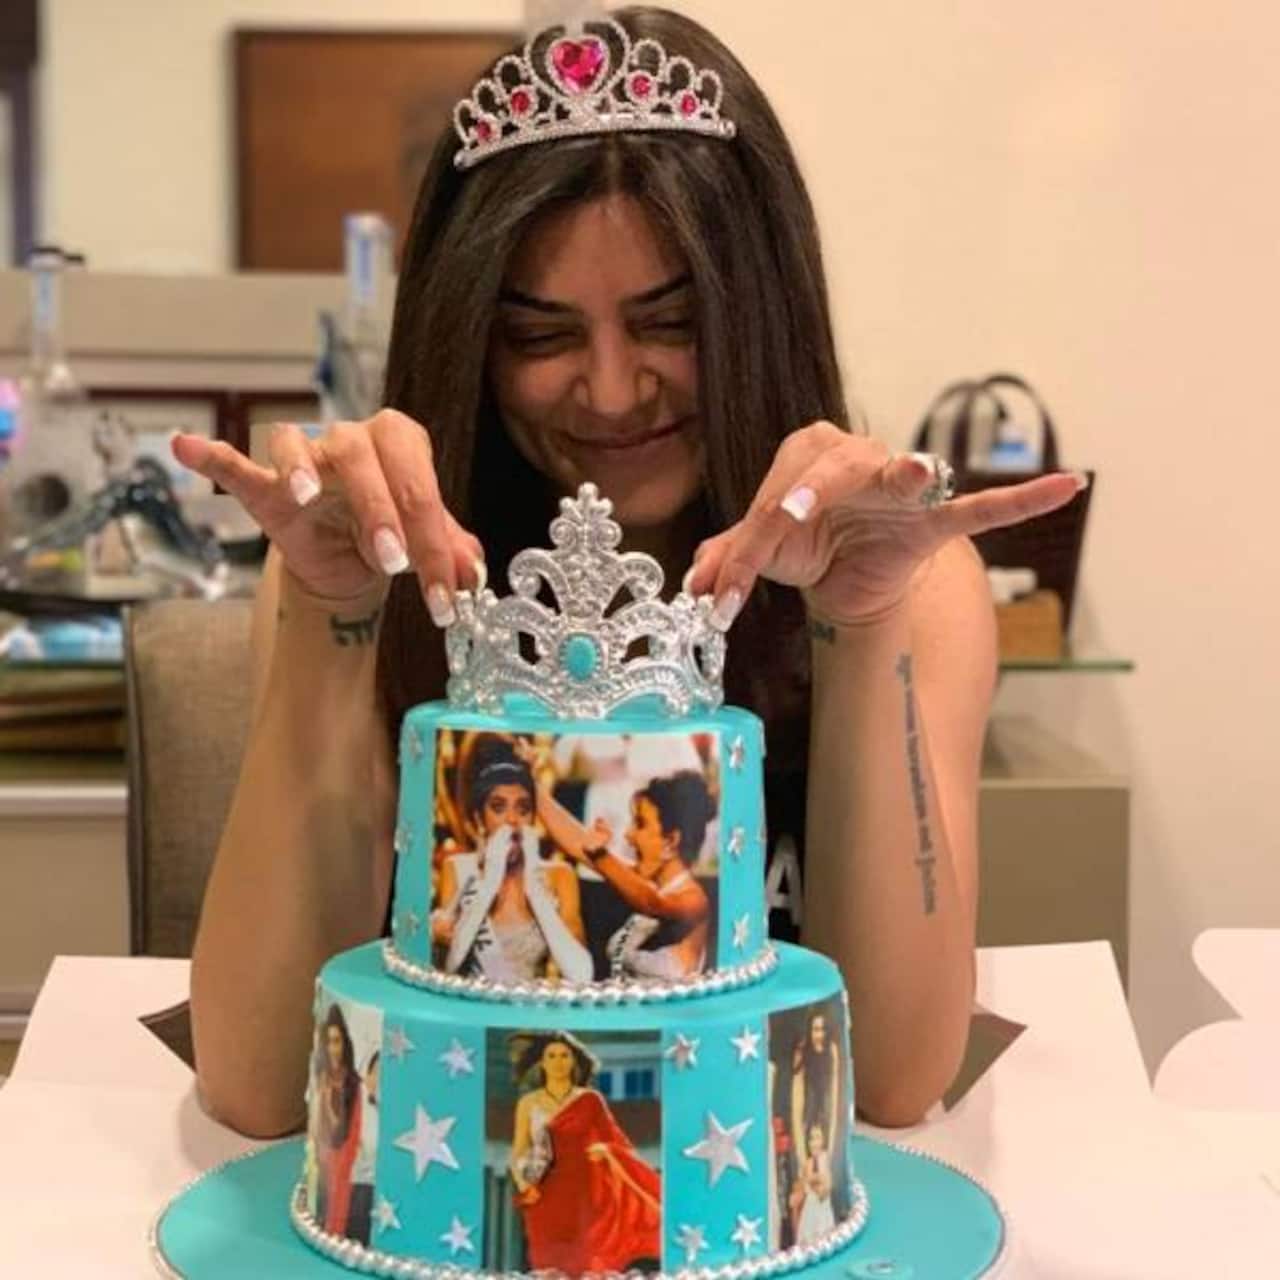 Sushmita Sen’s family crowns her again as she celebrates 25 years of winning Miss Universe – view pics and video